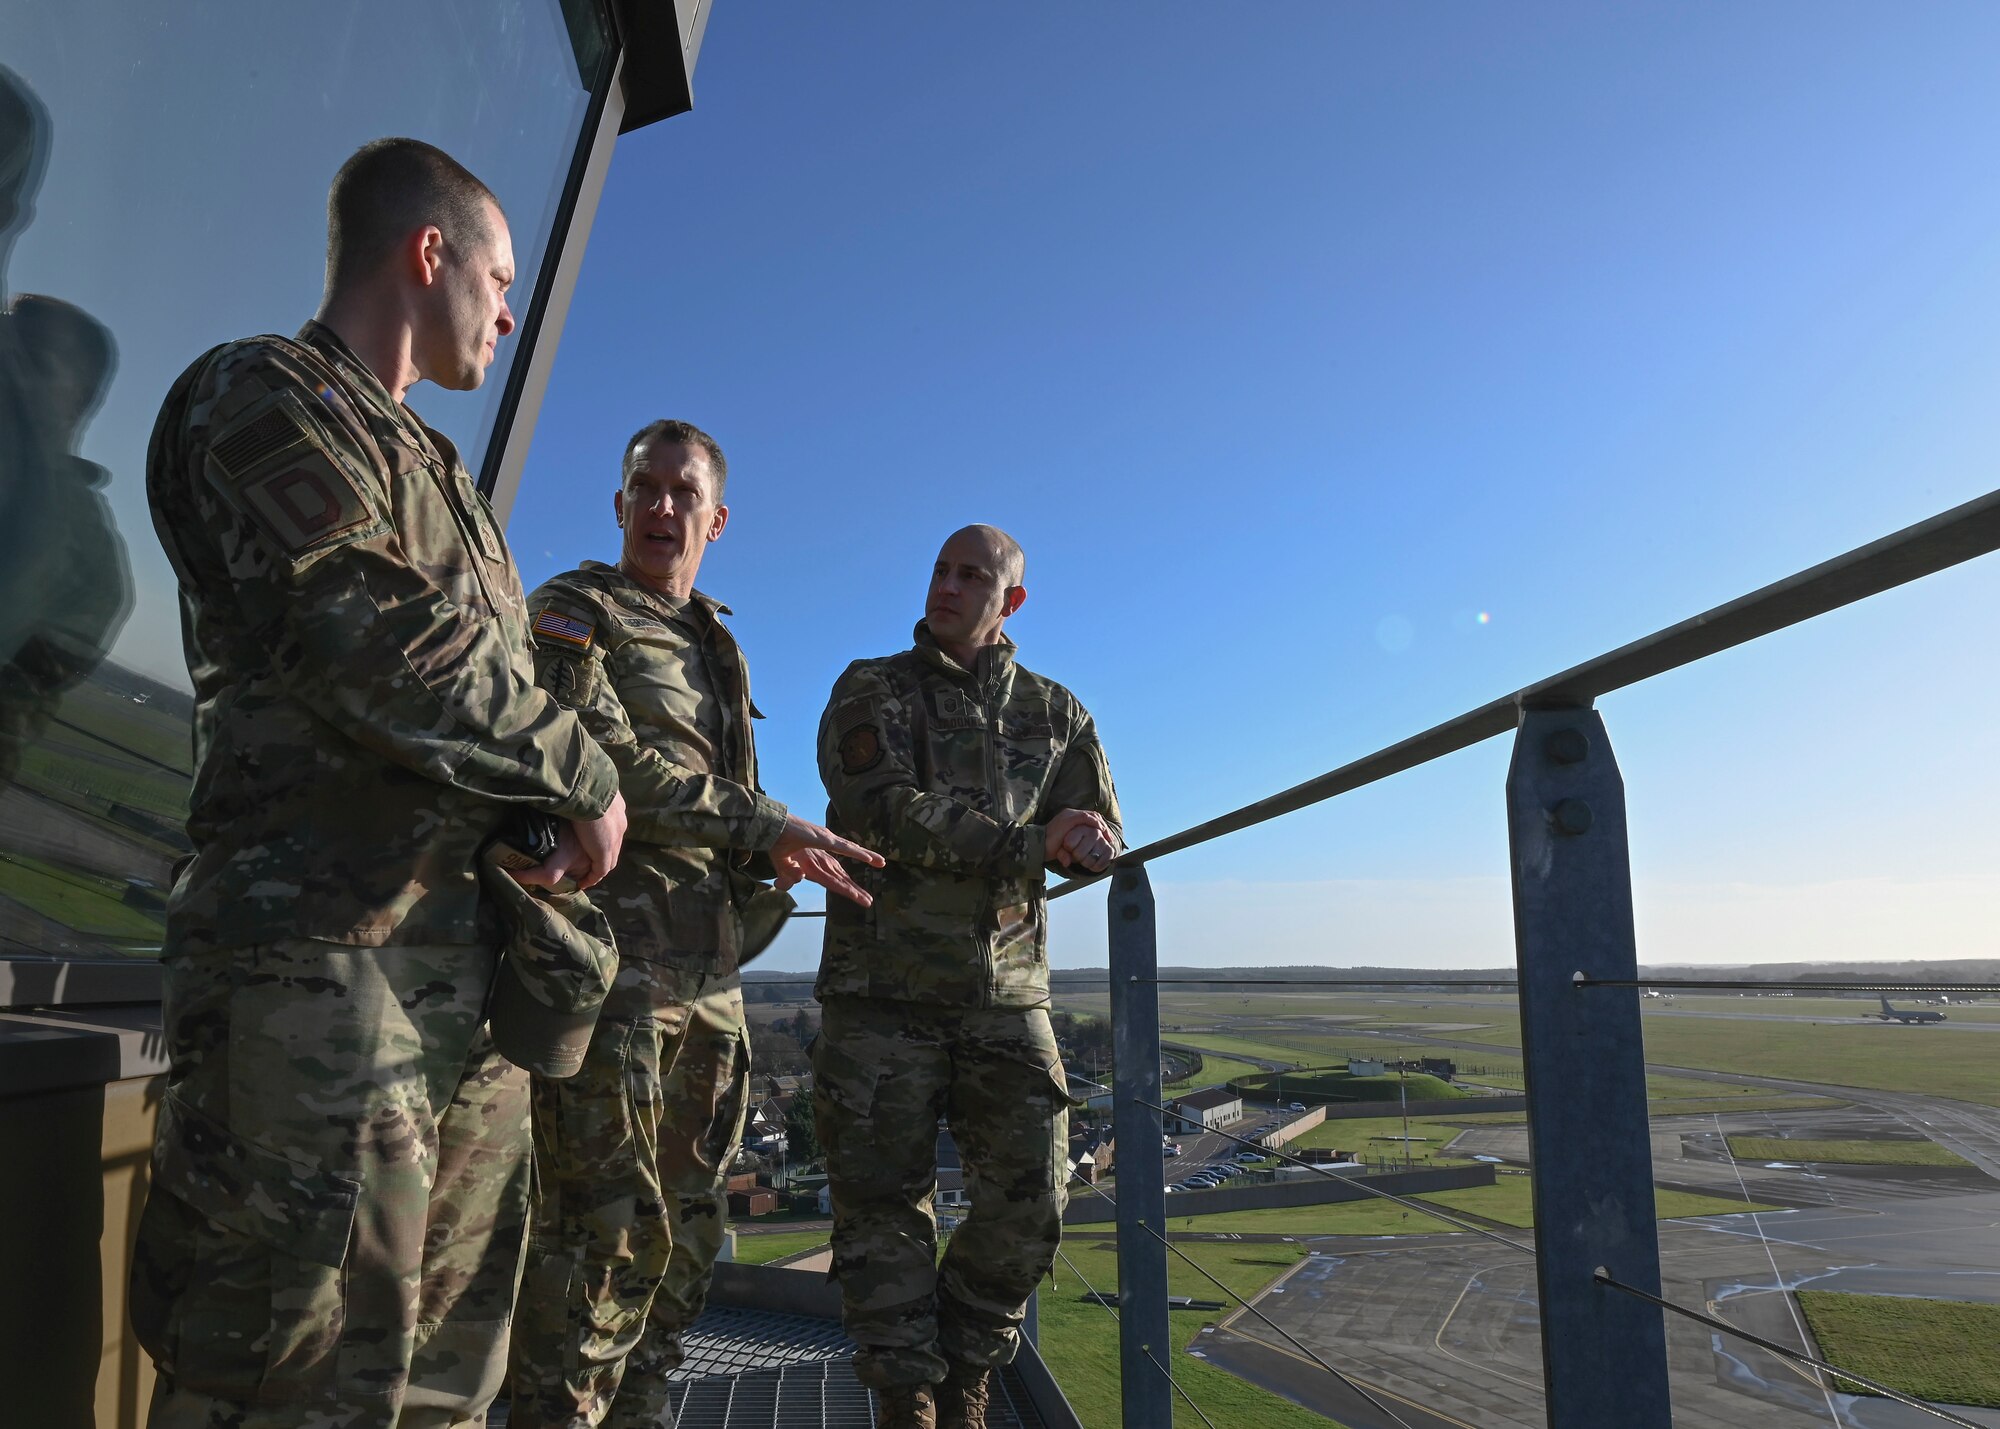 Abernethy travelled to RAF Mildenhall to meet with Airmen and learn about what strategic advantage the wing plays in the European theater.